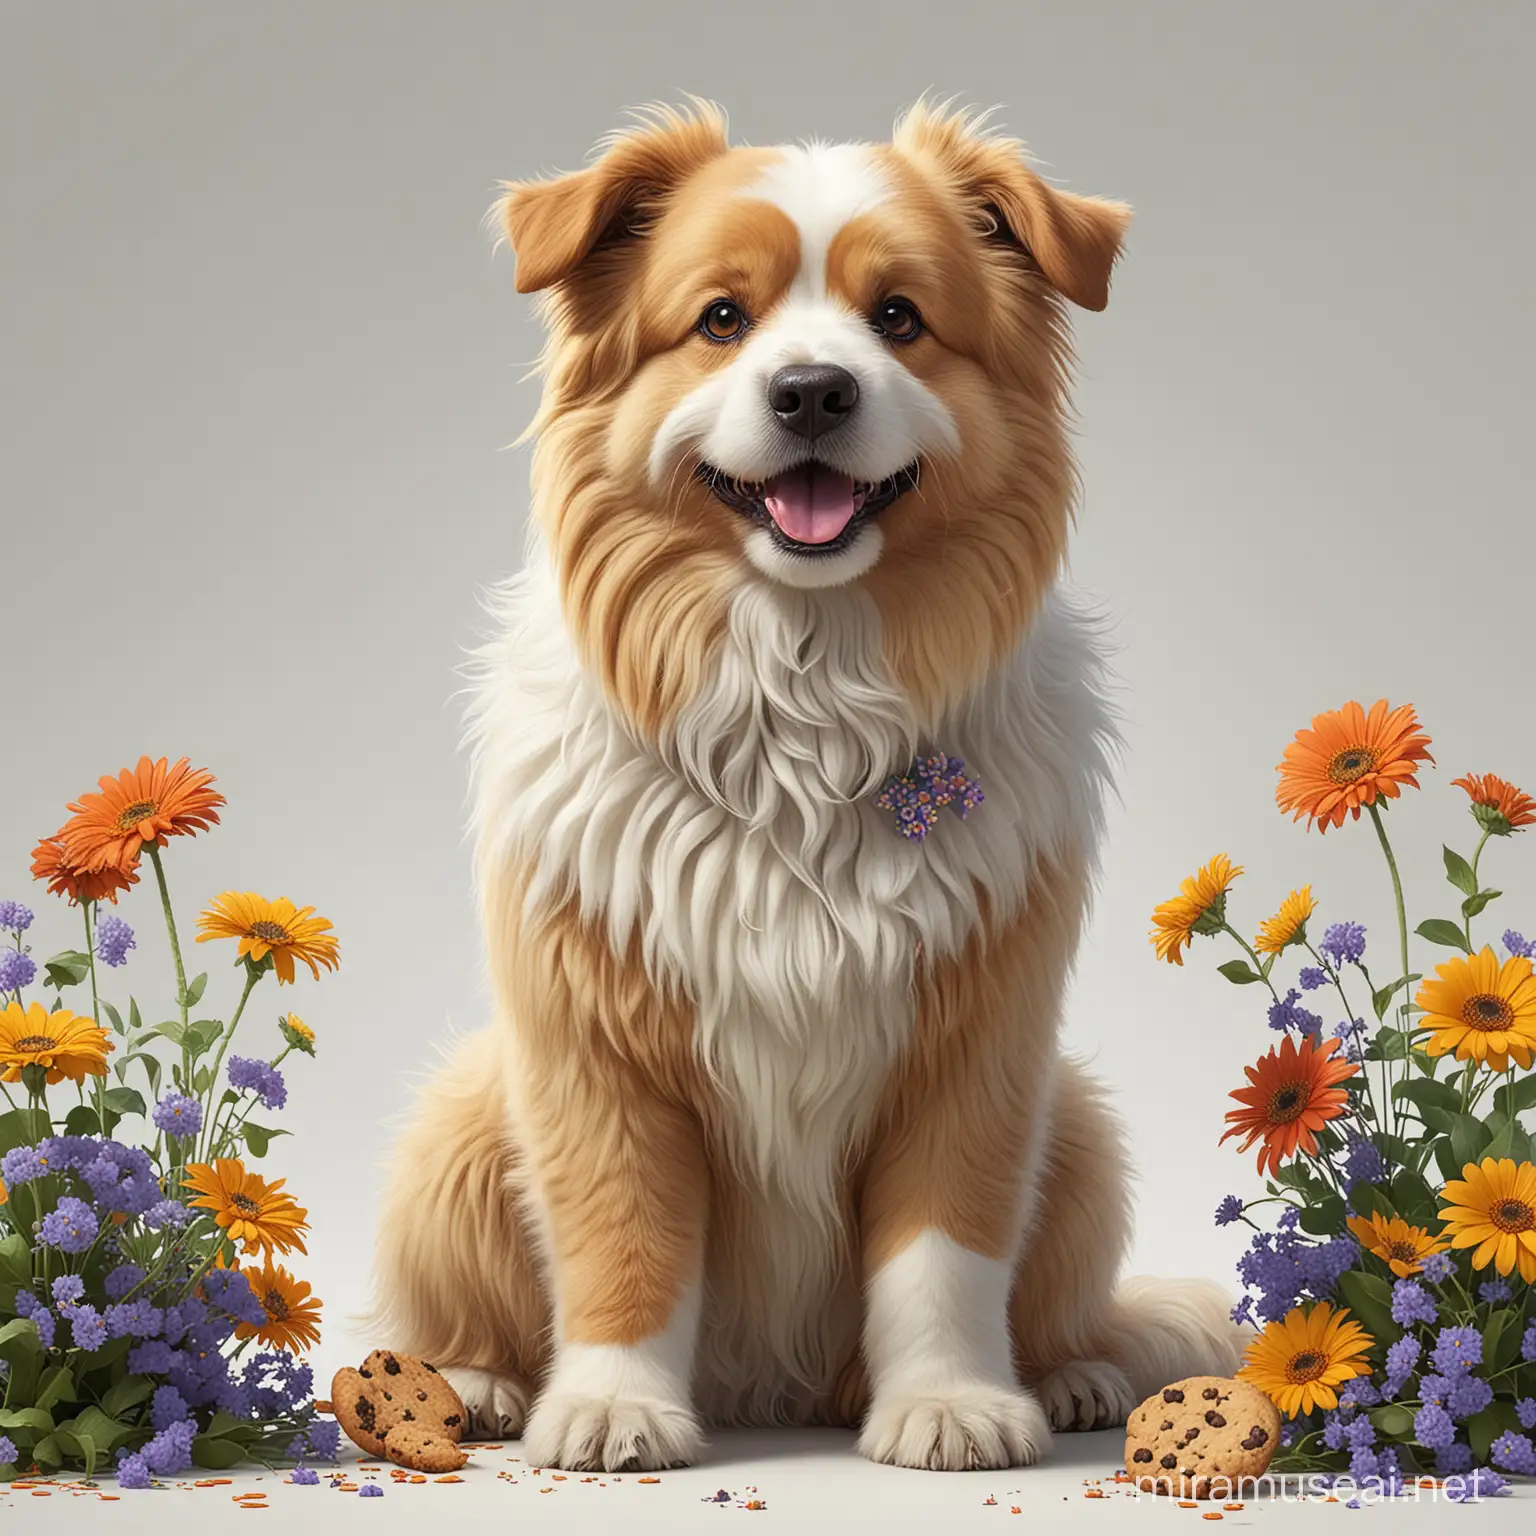 Adorable Fluffy Dog with Flower Adornment Enjoying a Cookie